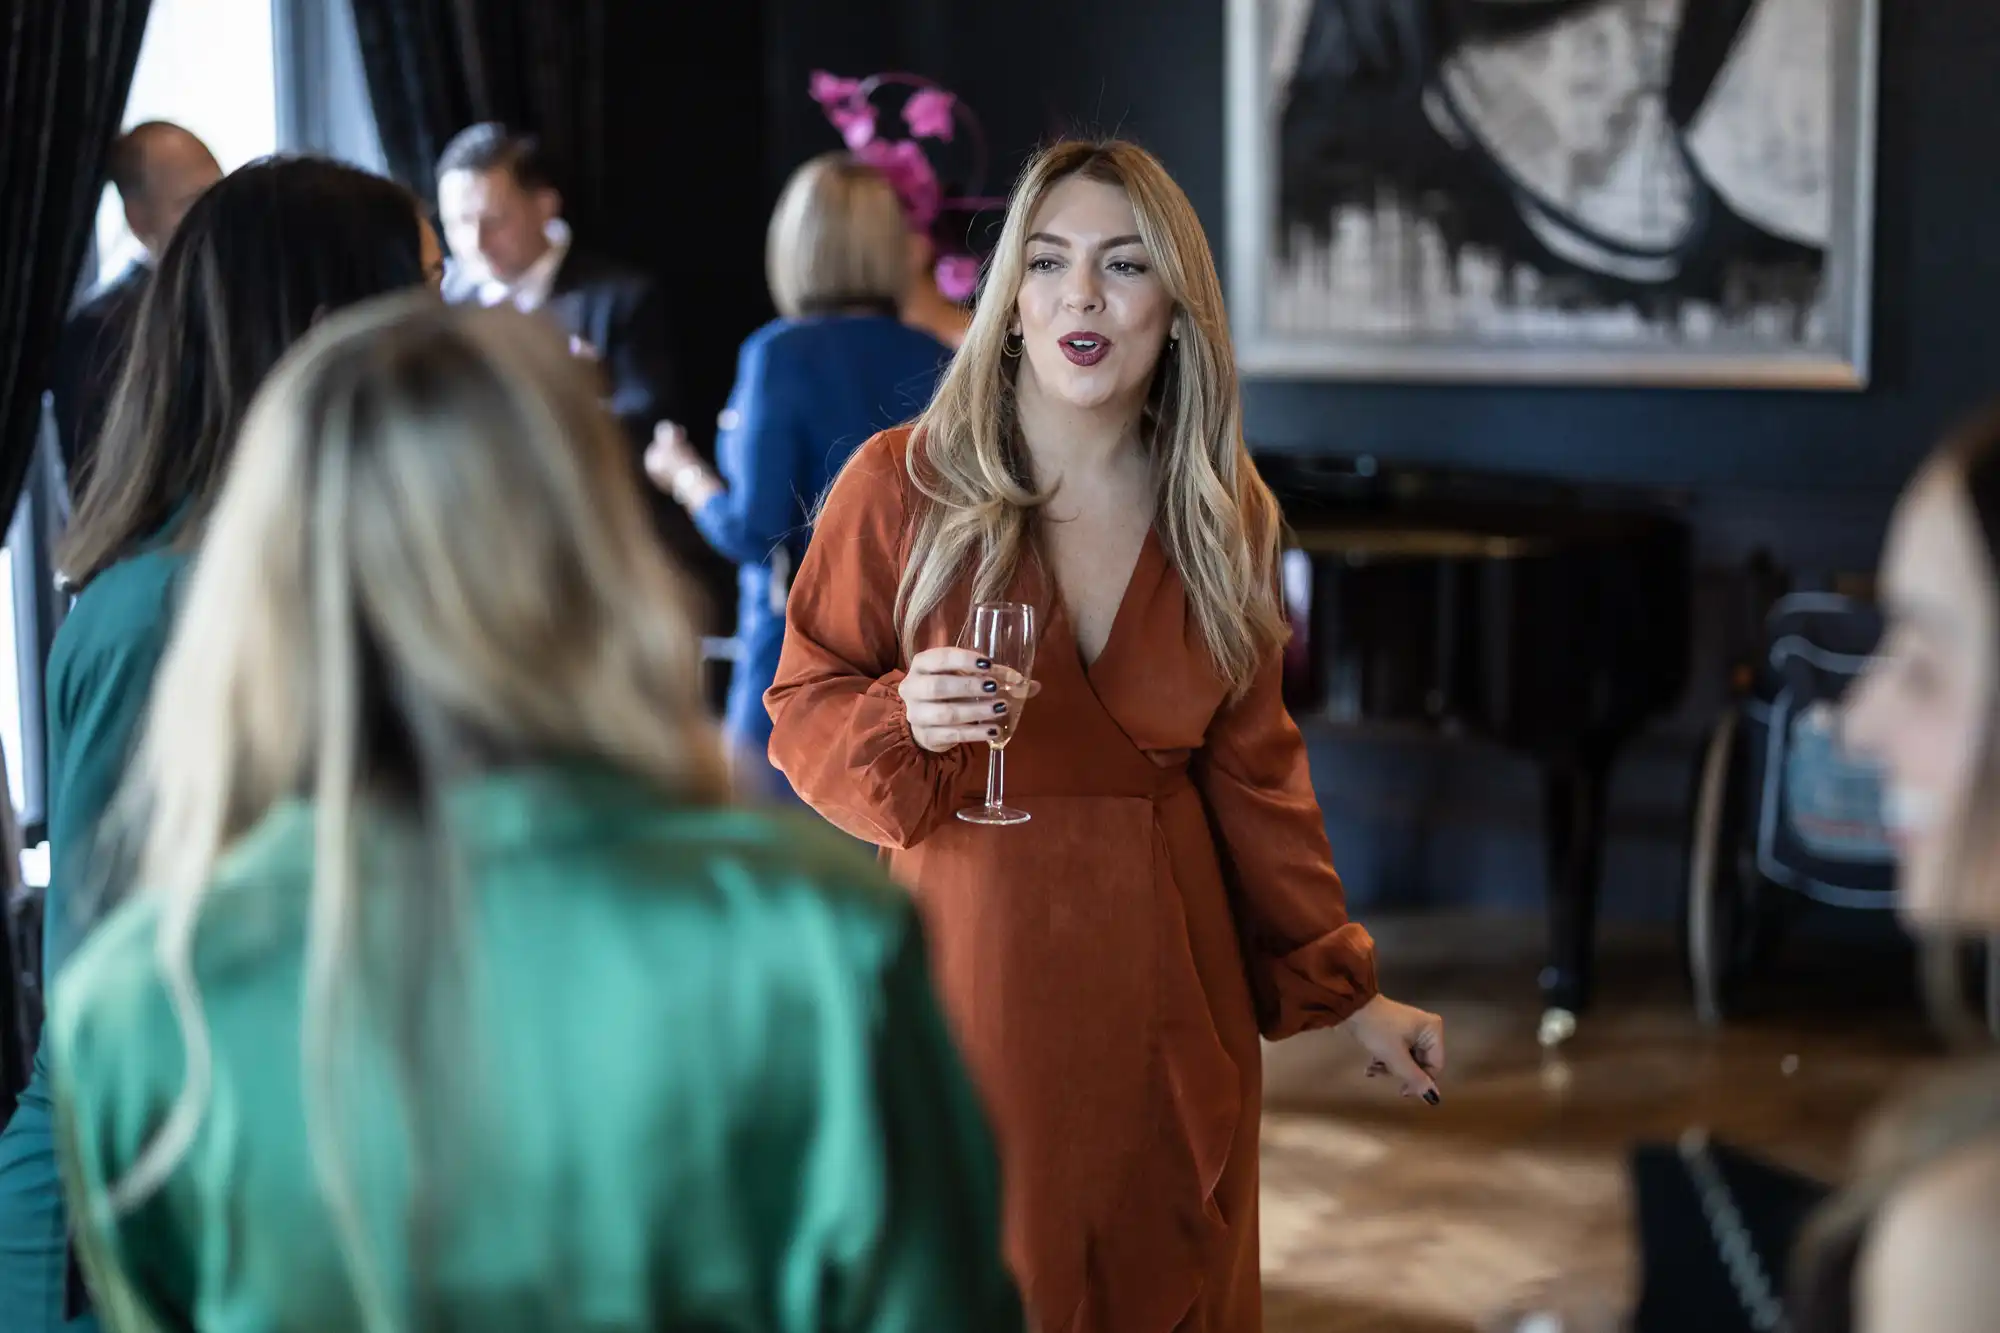 Woman in an orange dress holding a glass of wine, conversing with others at a social gathering indoors. A grand piano and artwork are in the background.